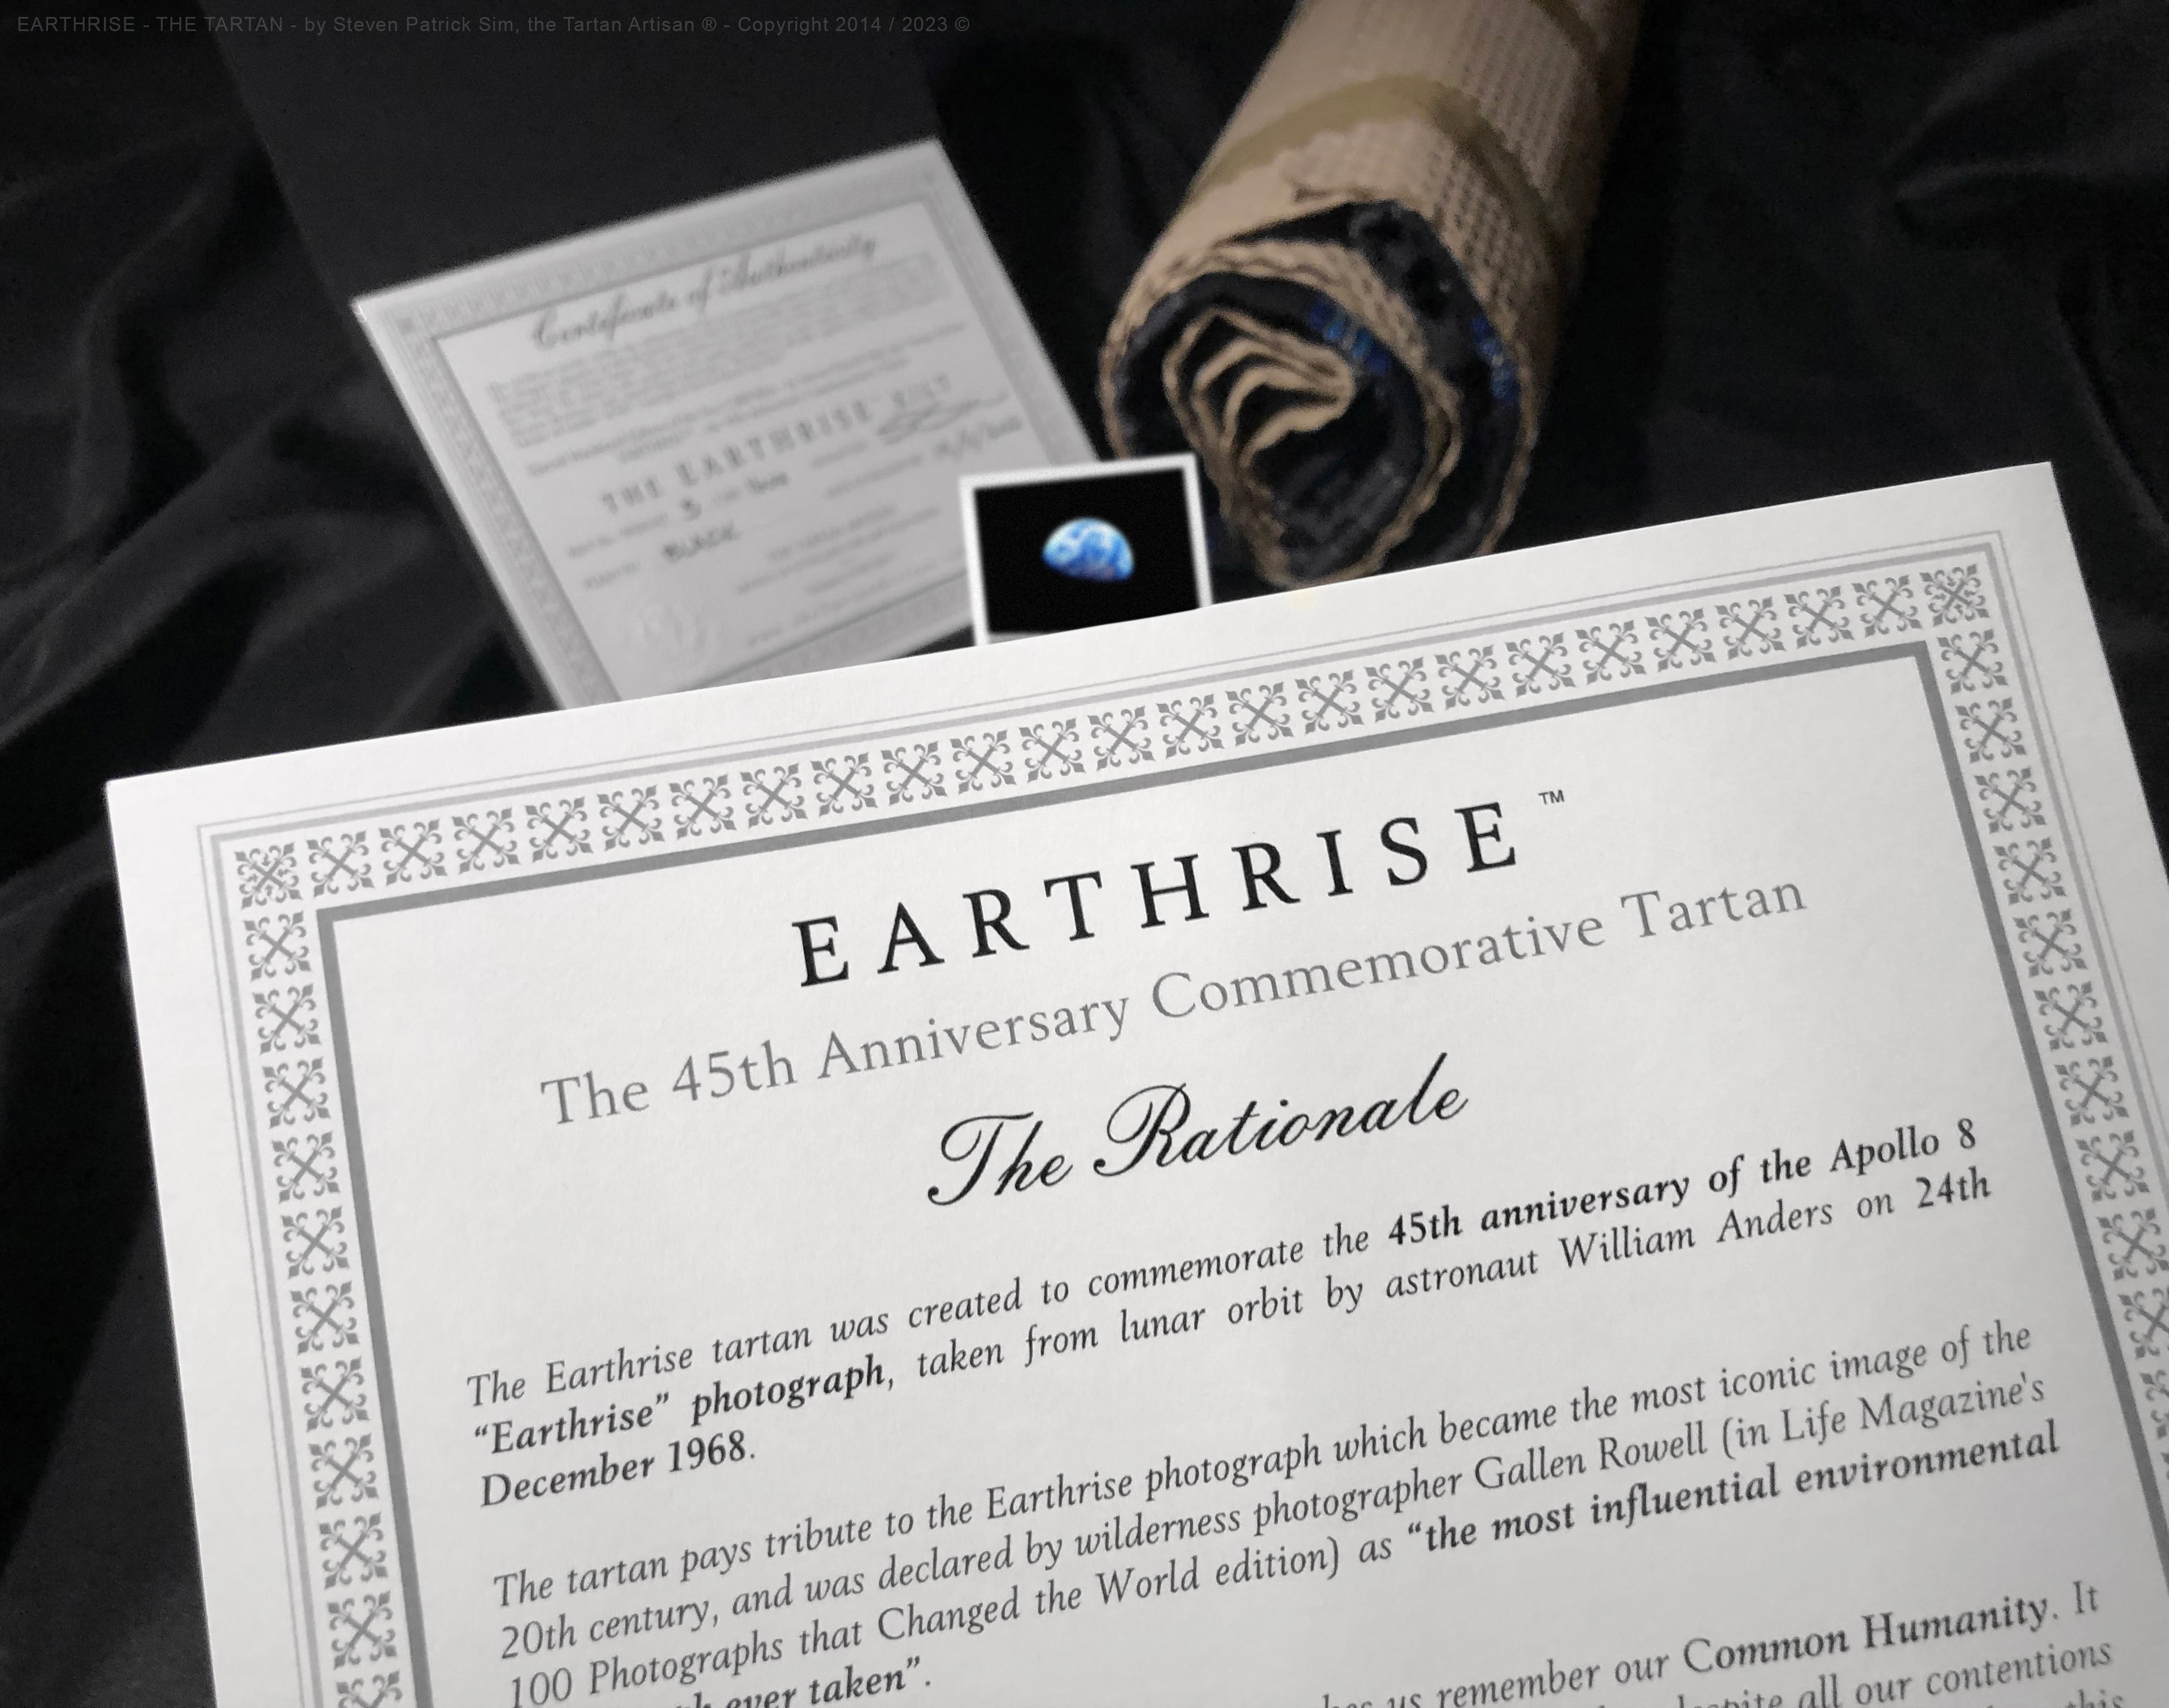 Earthrise Tartan 100 Numbered and certified kilts - by Steven Patrick Sim, Supplied with the full rationale in the tartan!